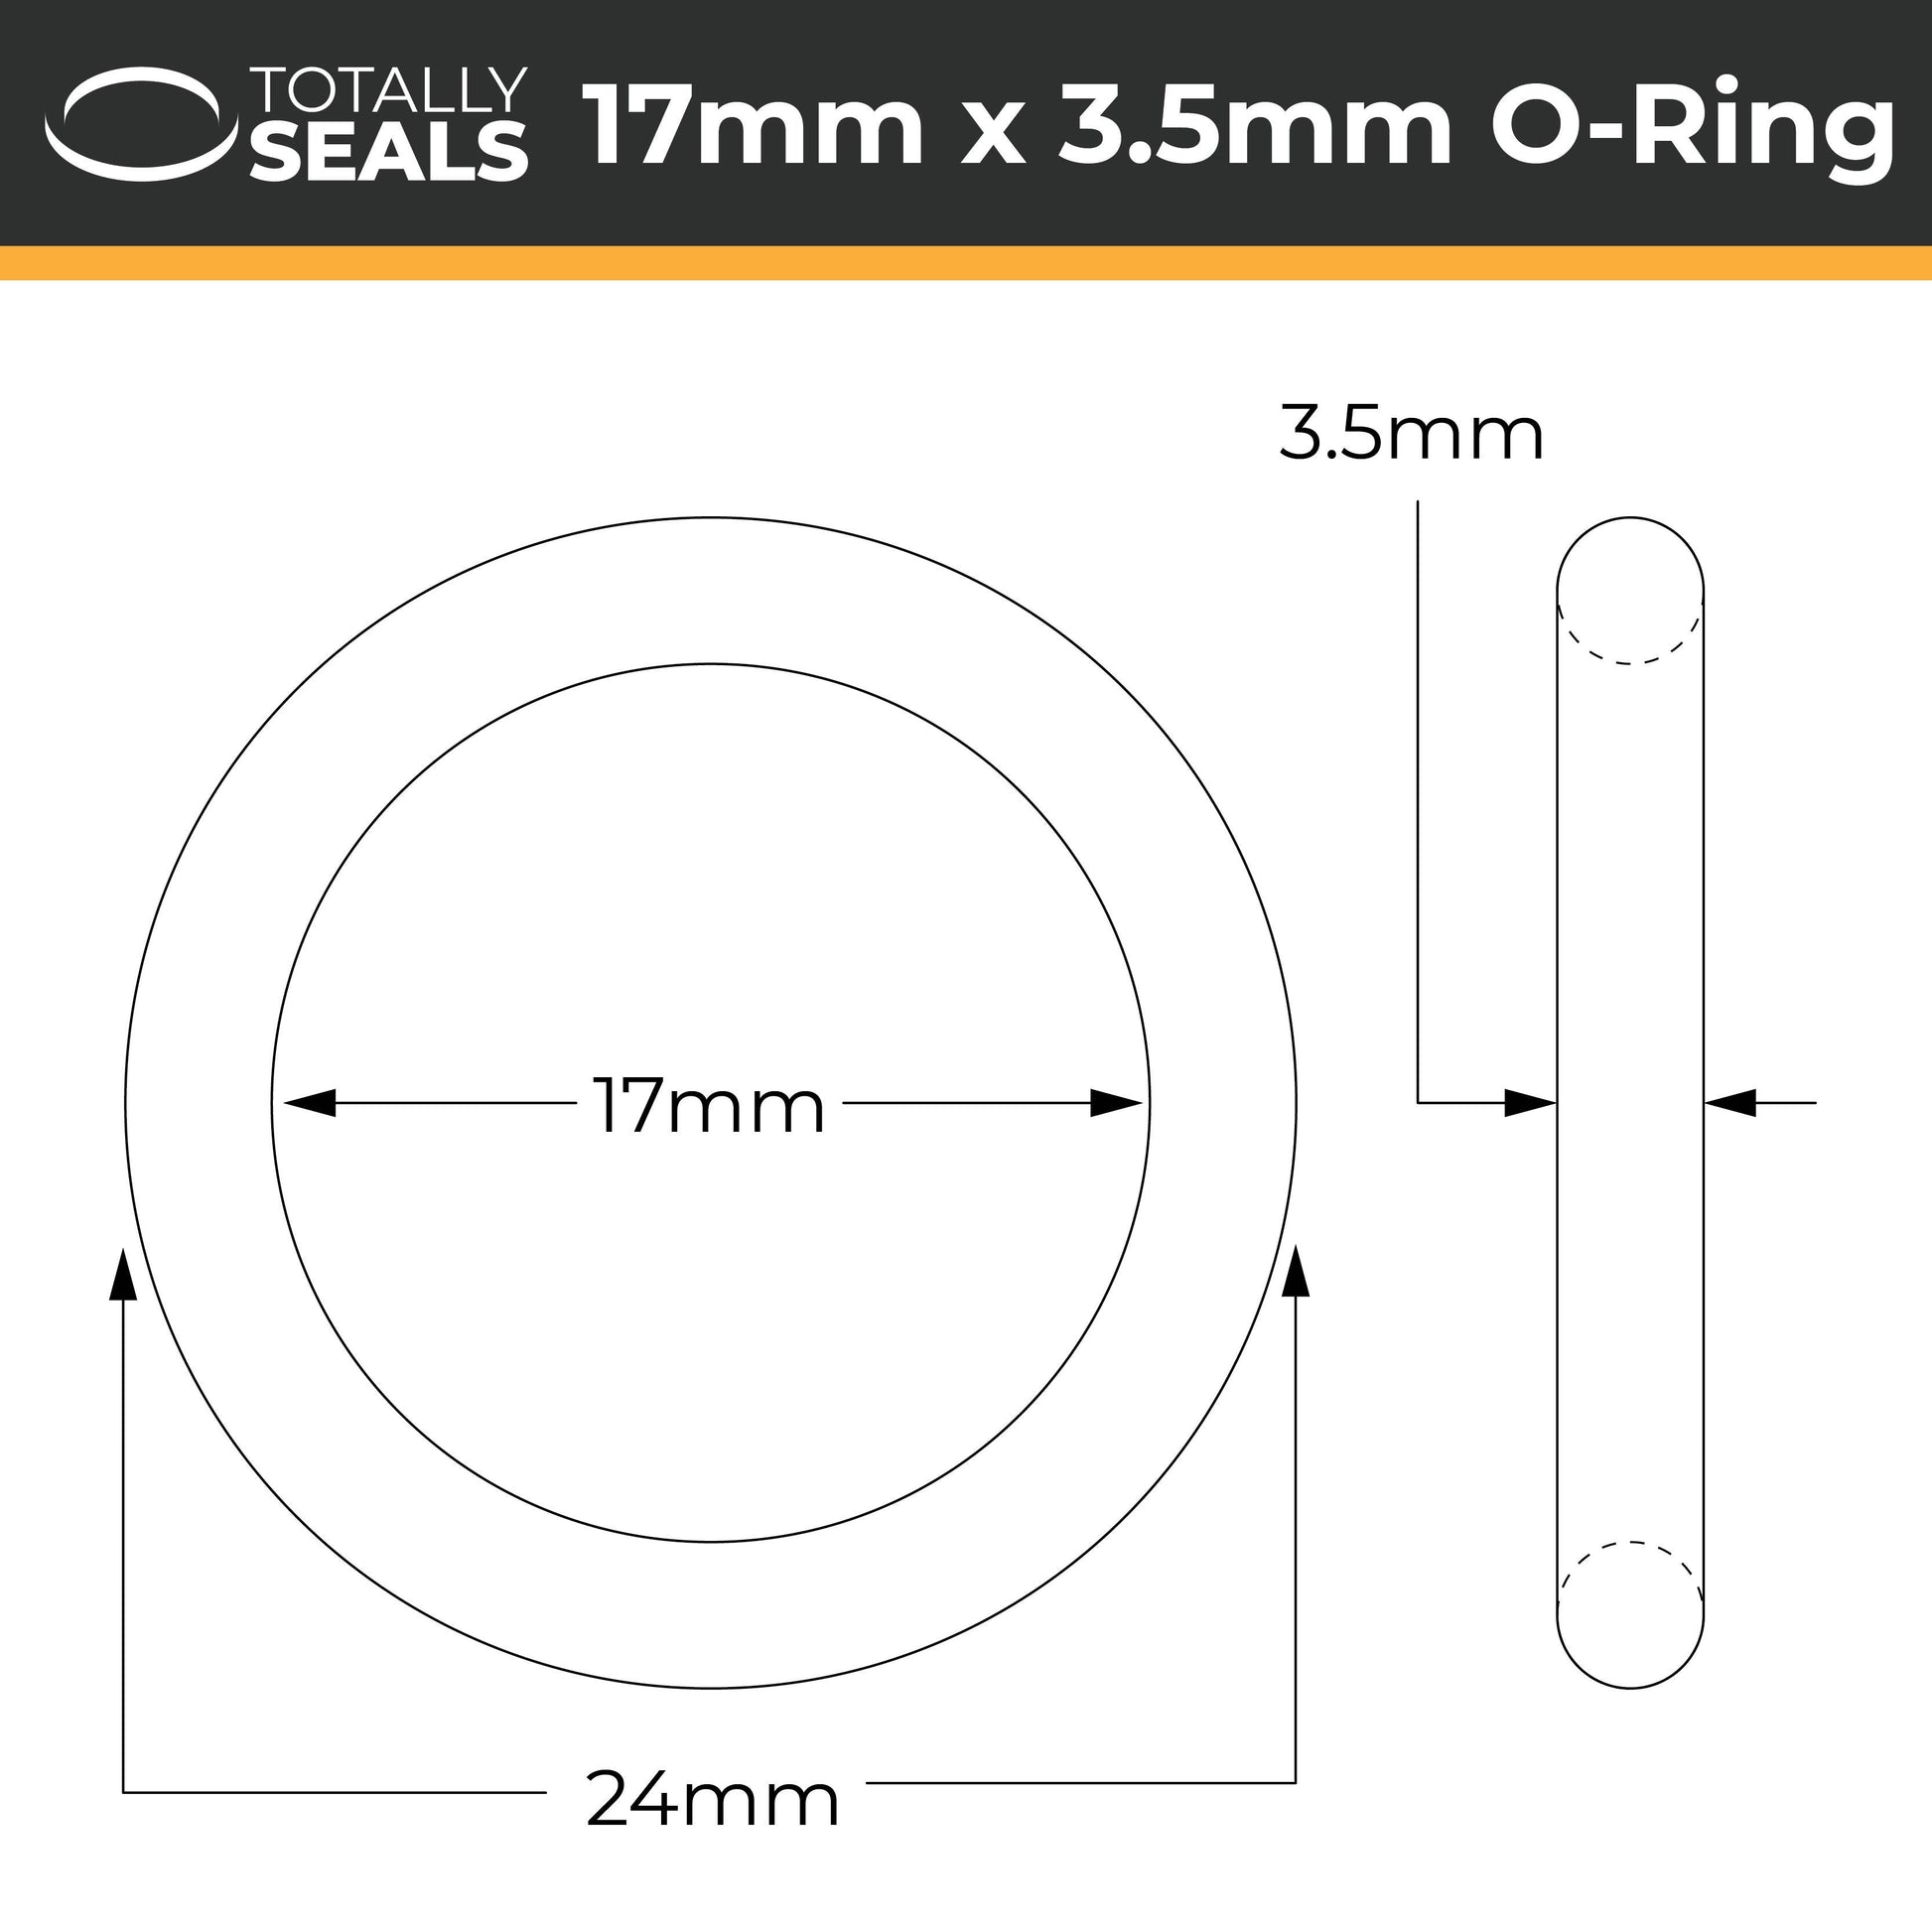 Stainless Steel O-Ring - 16mm x 2.5mm - 20 Pack